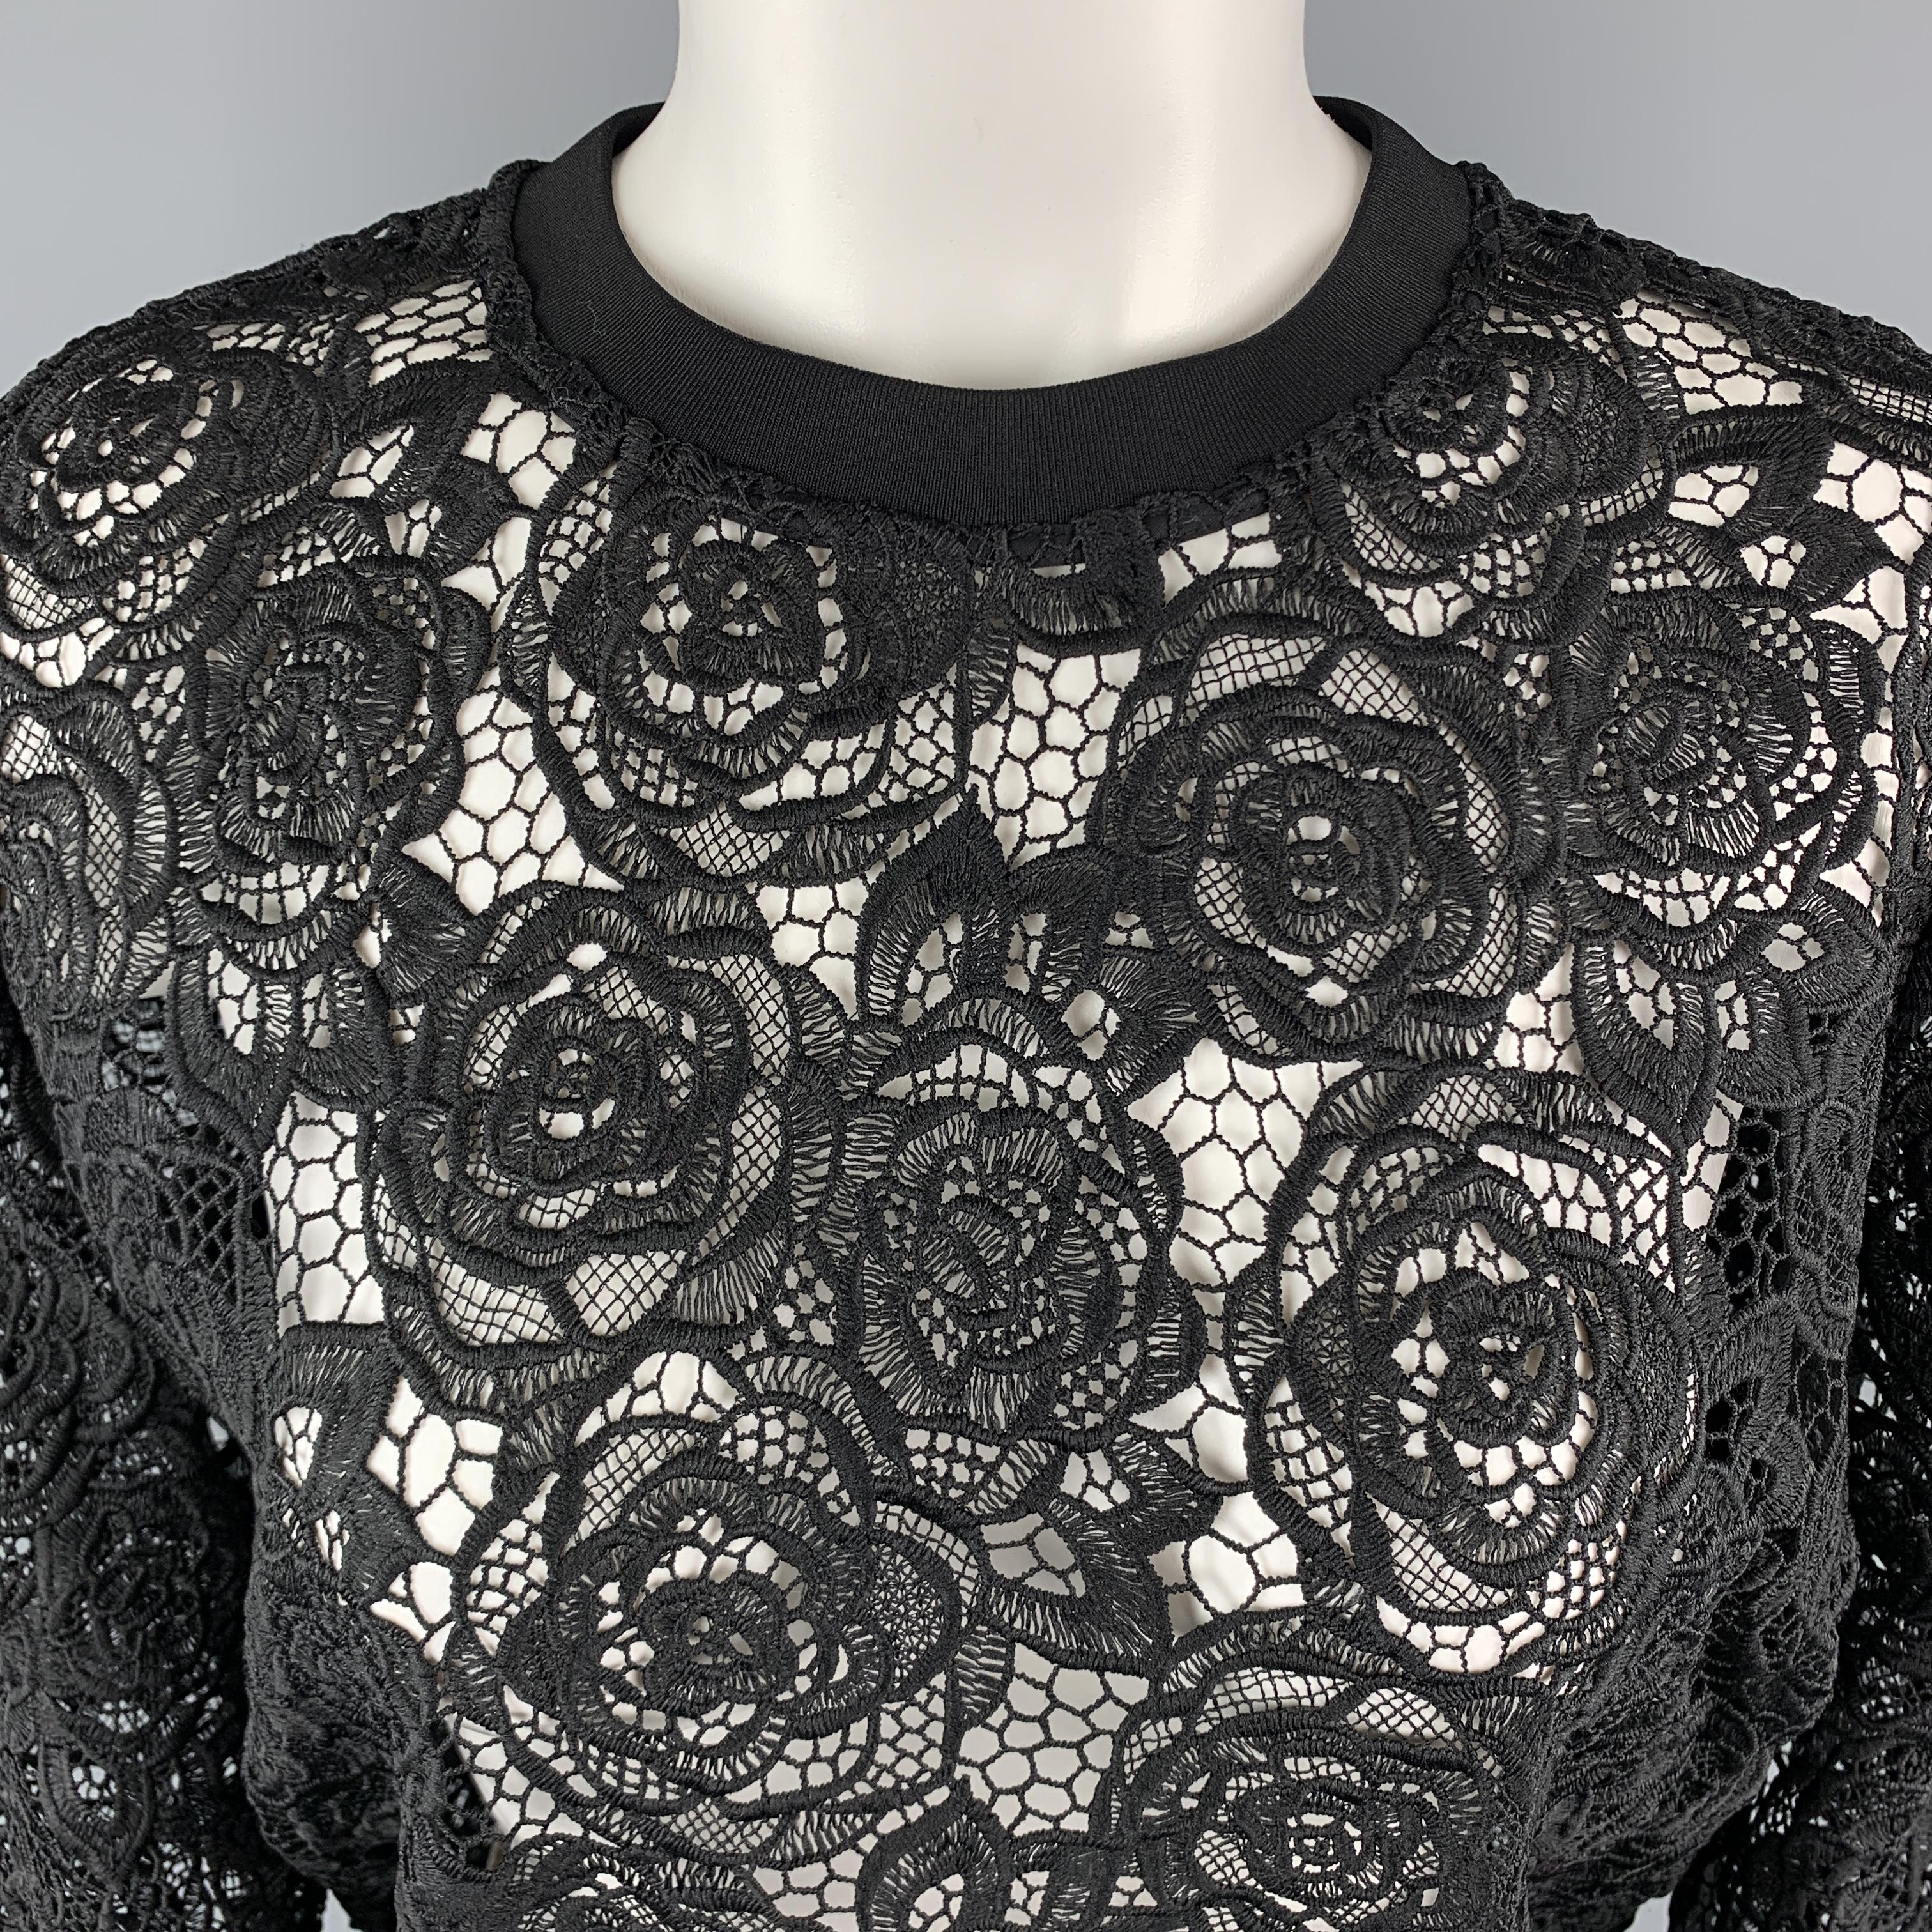 MCQ by ALEXANDER MCQUEEN Pullover Sweater comes in a black tone in a floral motif lace material, with a crewneck, a back zip, and ribbed cuffs and hem. 

Excellent Pre-Owned Condition.
Marked: IT 38

Measurements:

Shoulder: 15 in. 
Bust: 41 in.